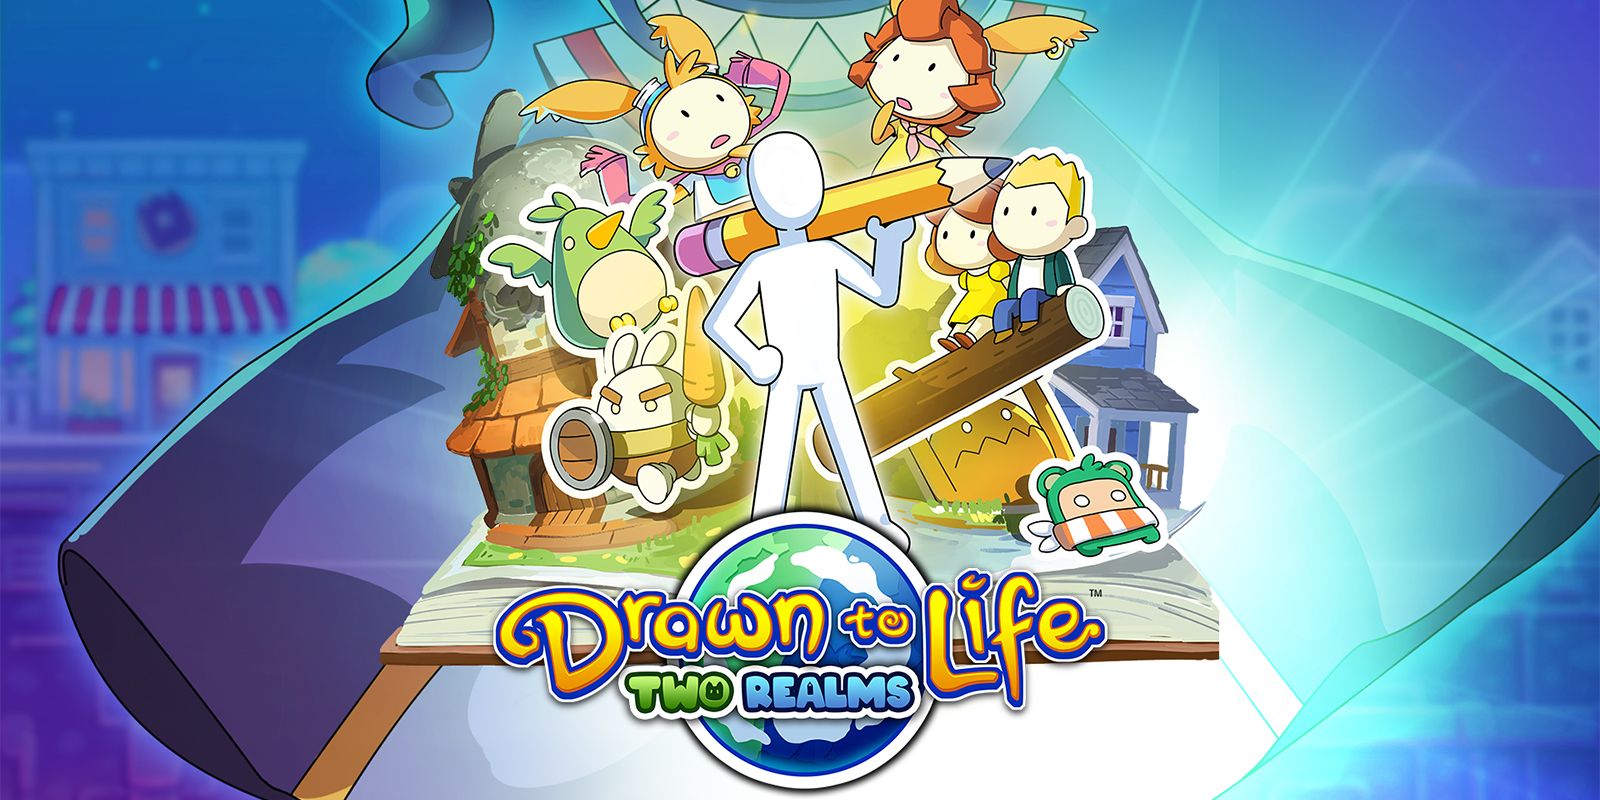 drawn to life review